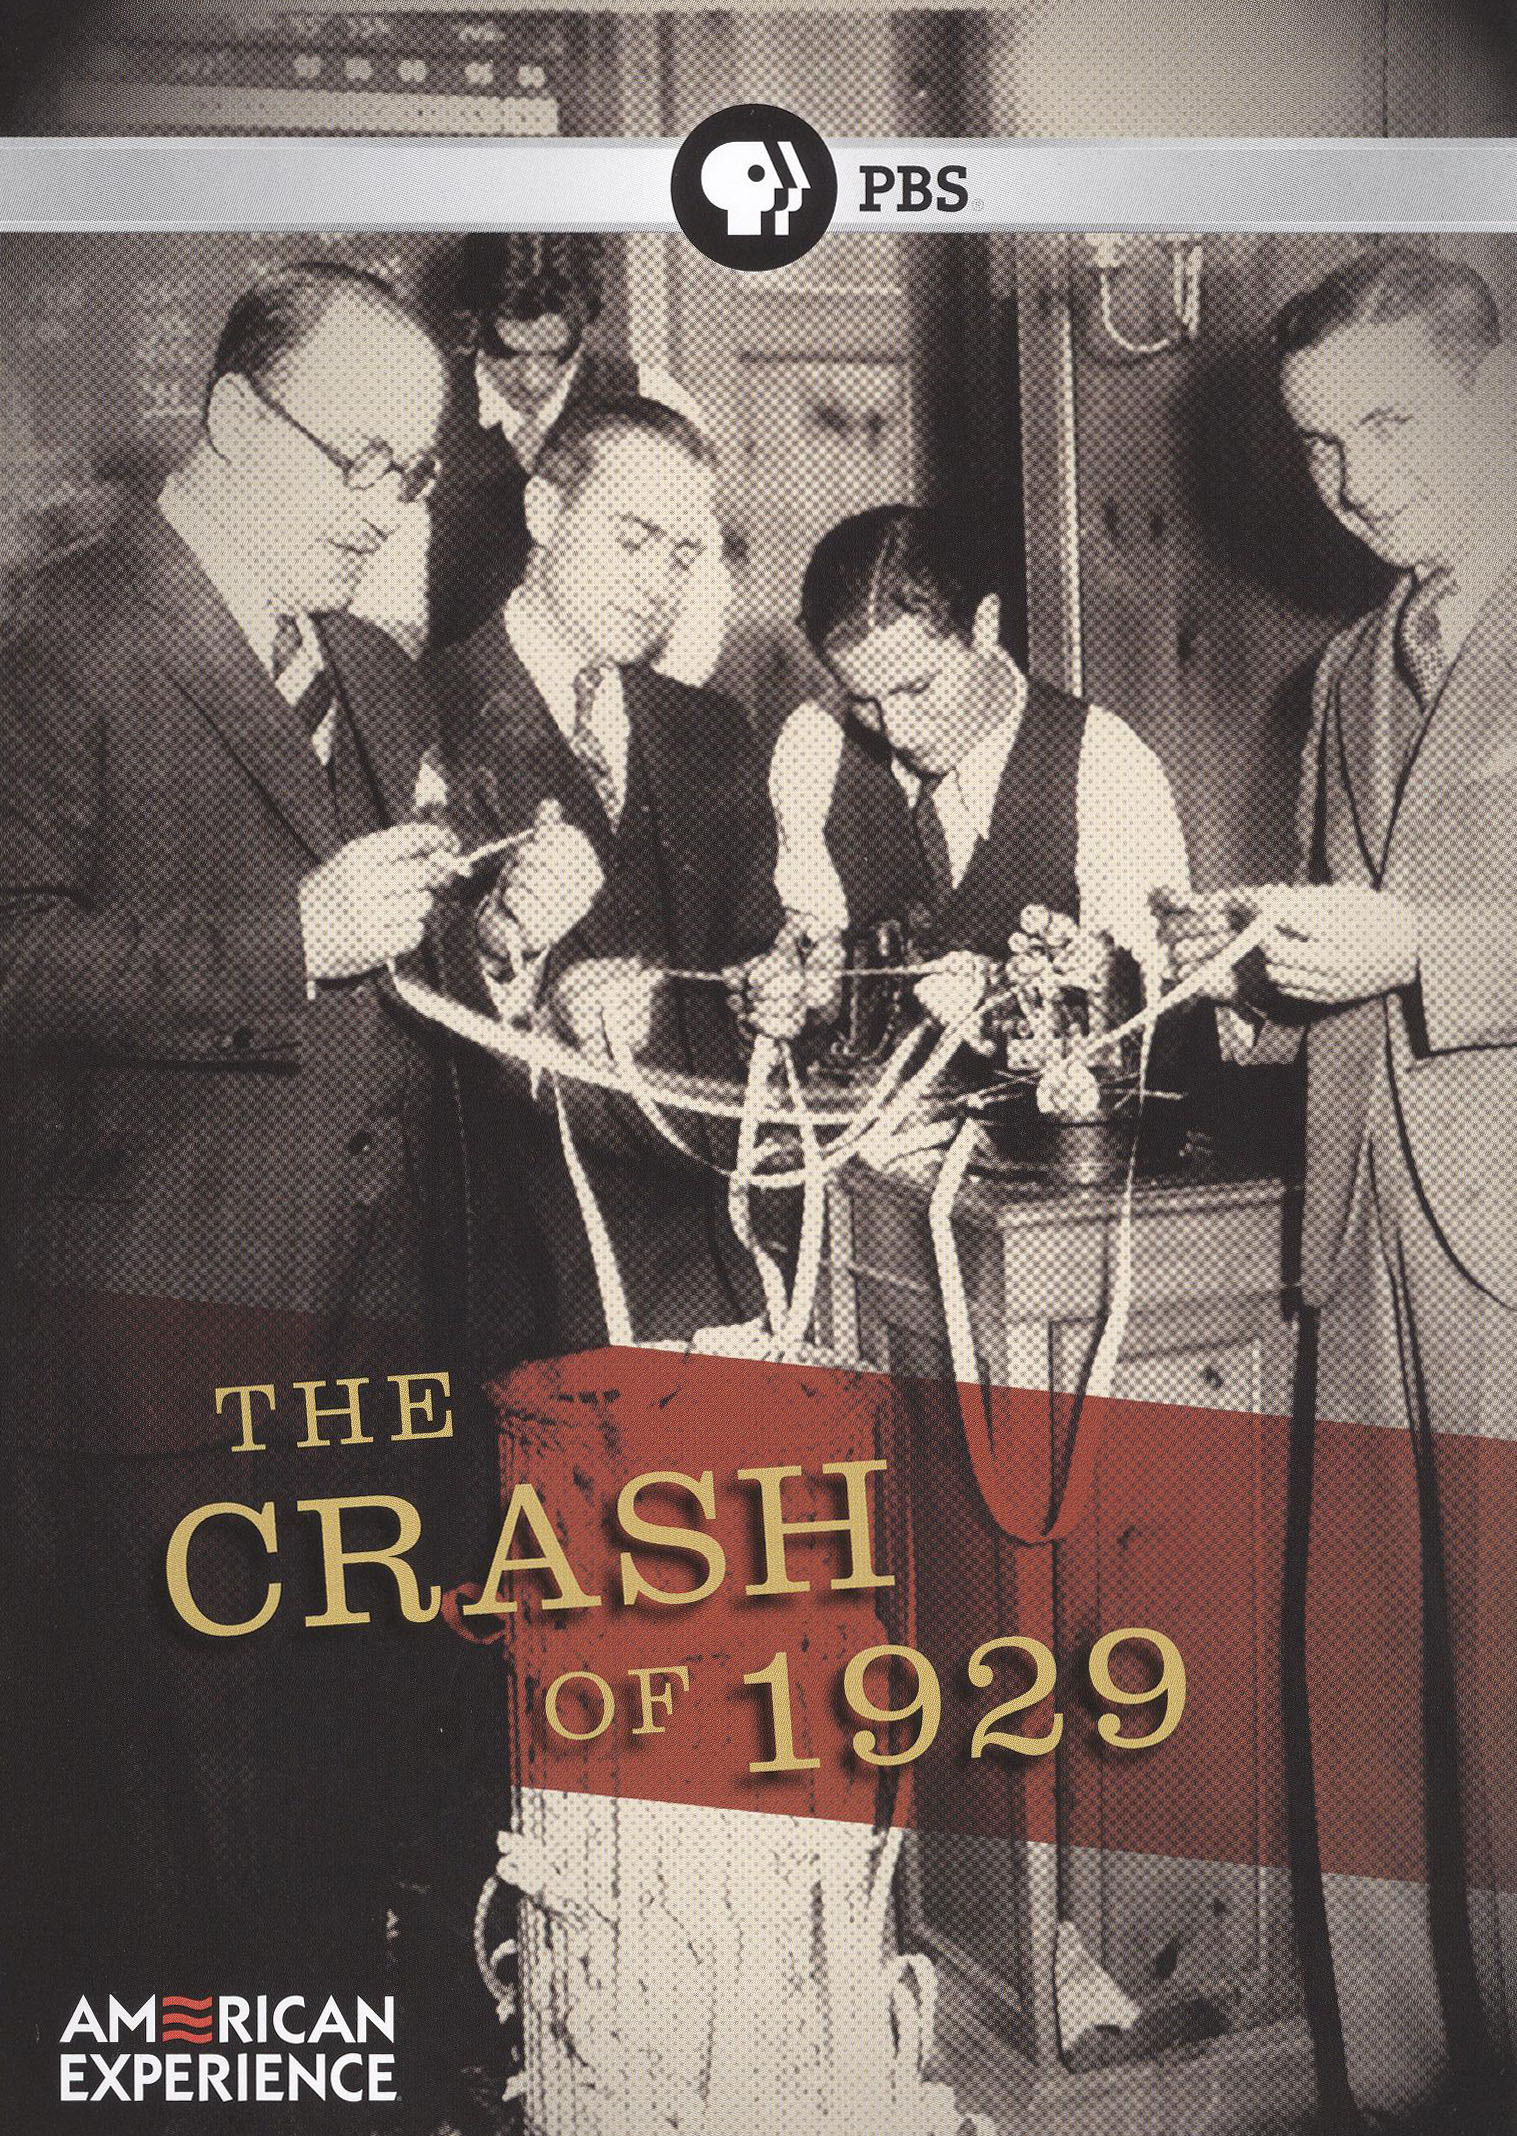 American Experience: The Crash of 1929 [DVD] [1990]